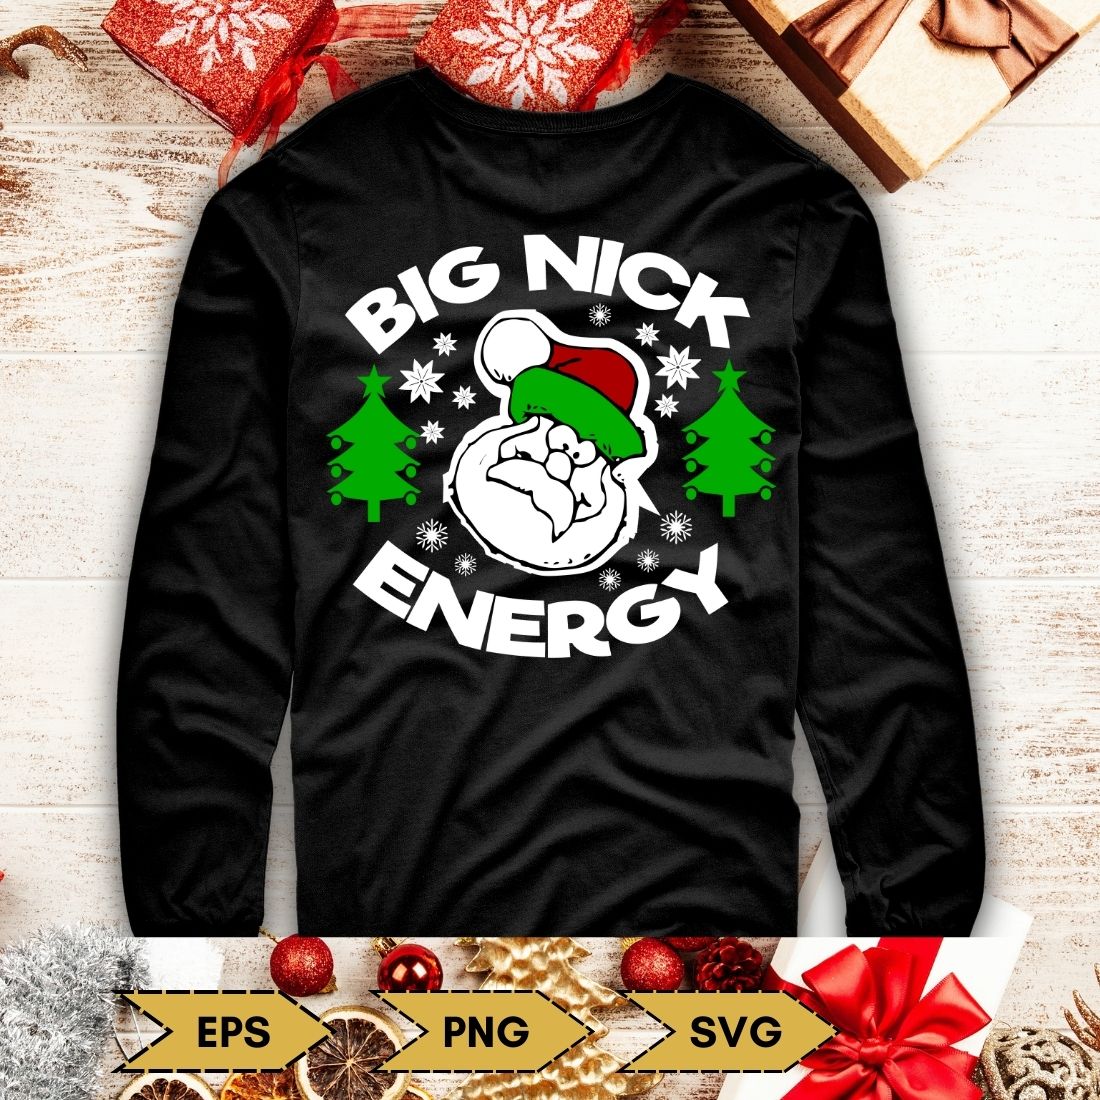 Image of a black sweatshirt with a beautiful print with Santa.